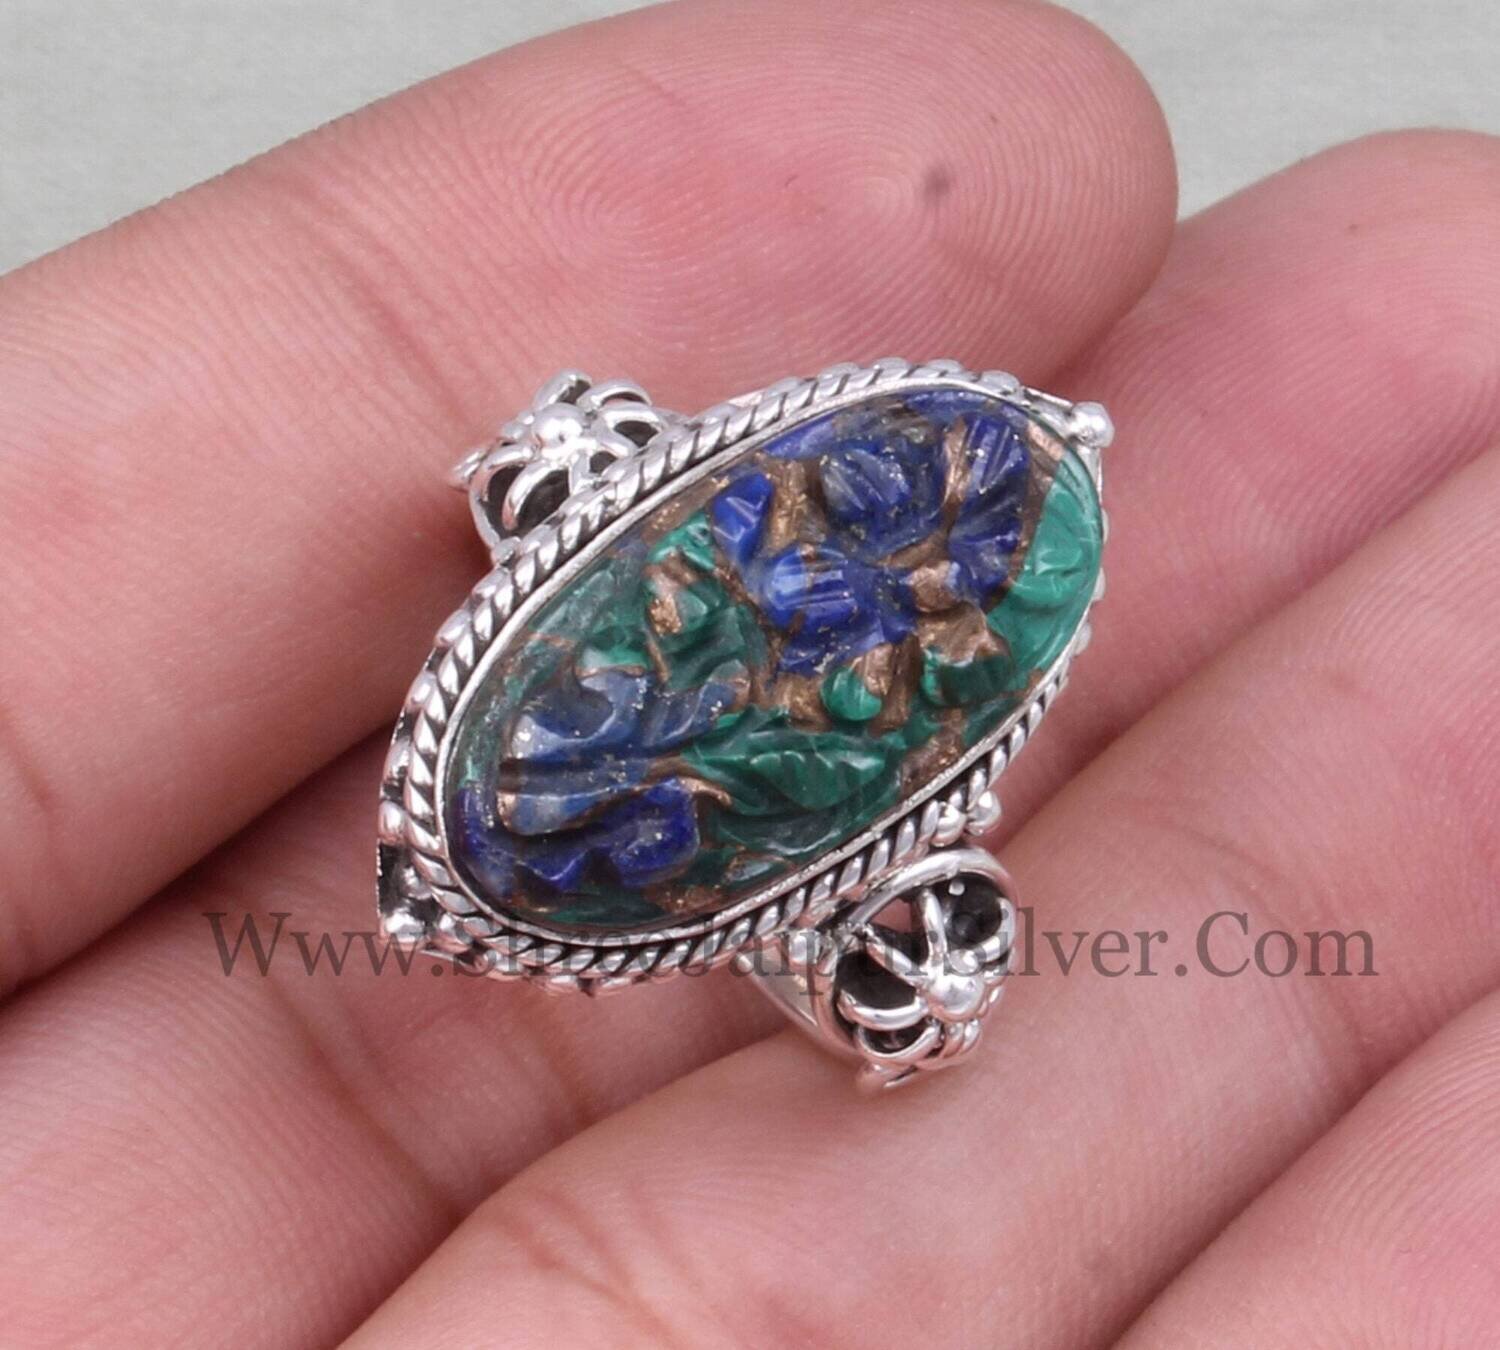 Lapis Lazuli & Malachite Copper Gemstone Hand Engraved Solid 925 Sterling Silver Ring For Women, Carved Oval Ring Gifts Idea For Anniversary